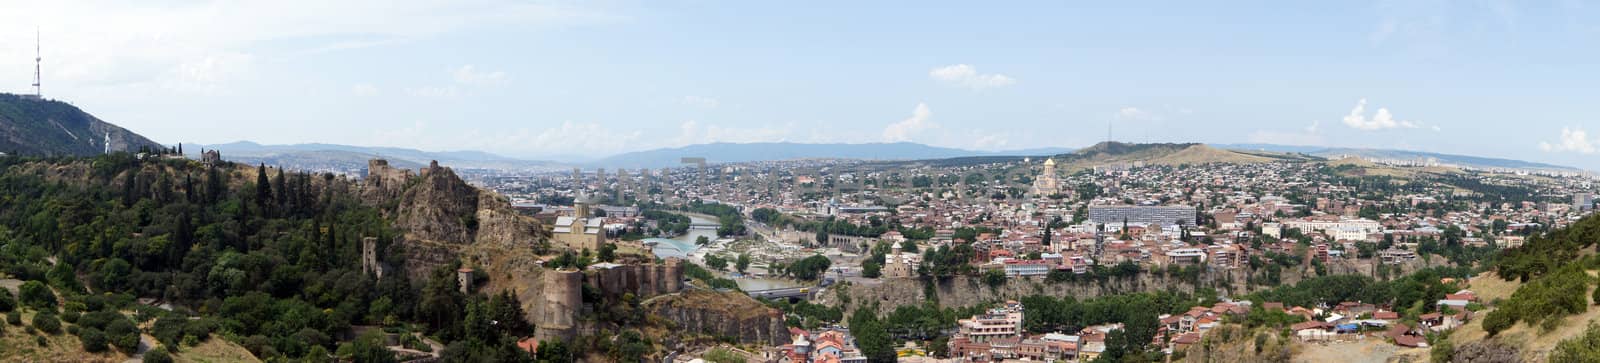 Tbilisi castle panorama by Elet